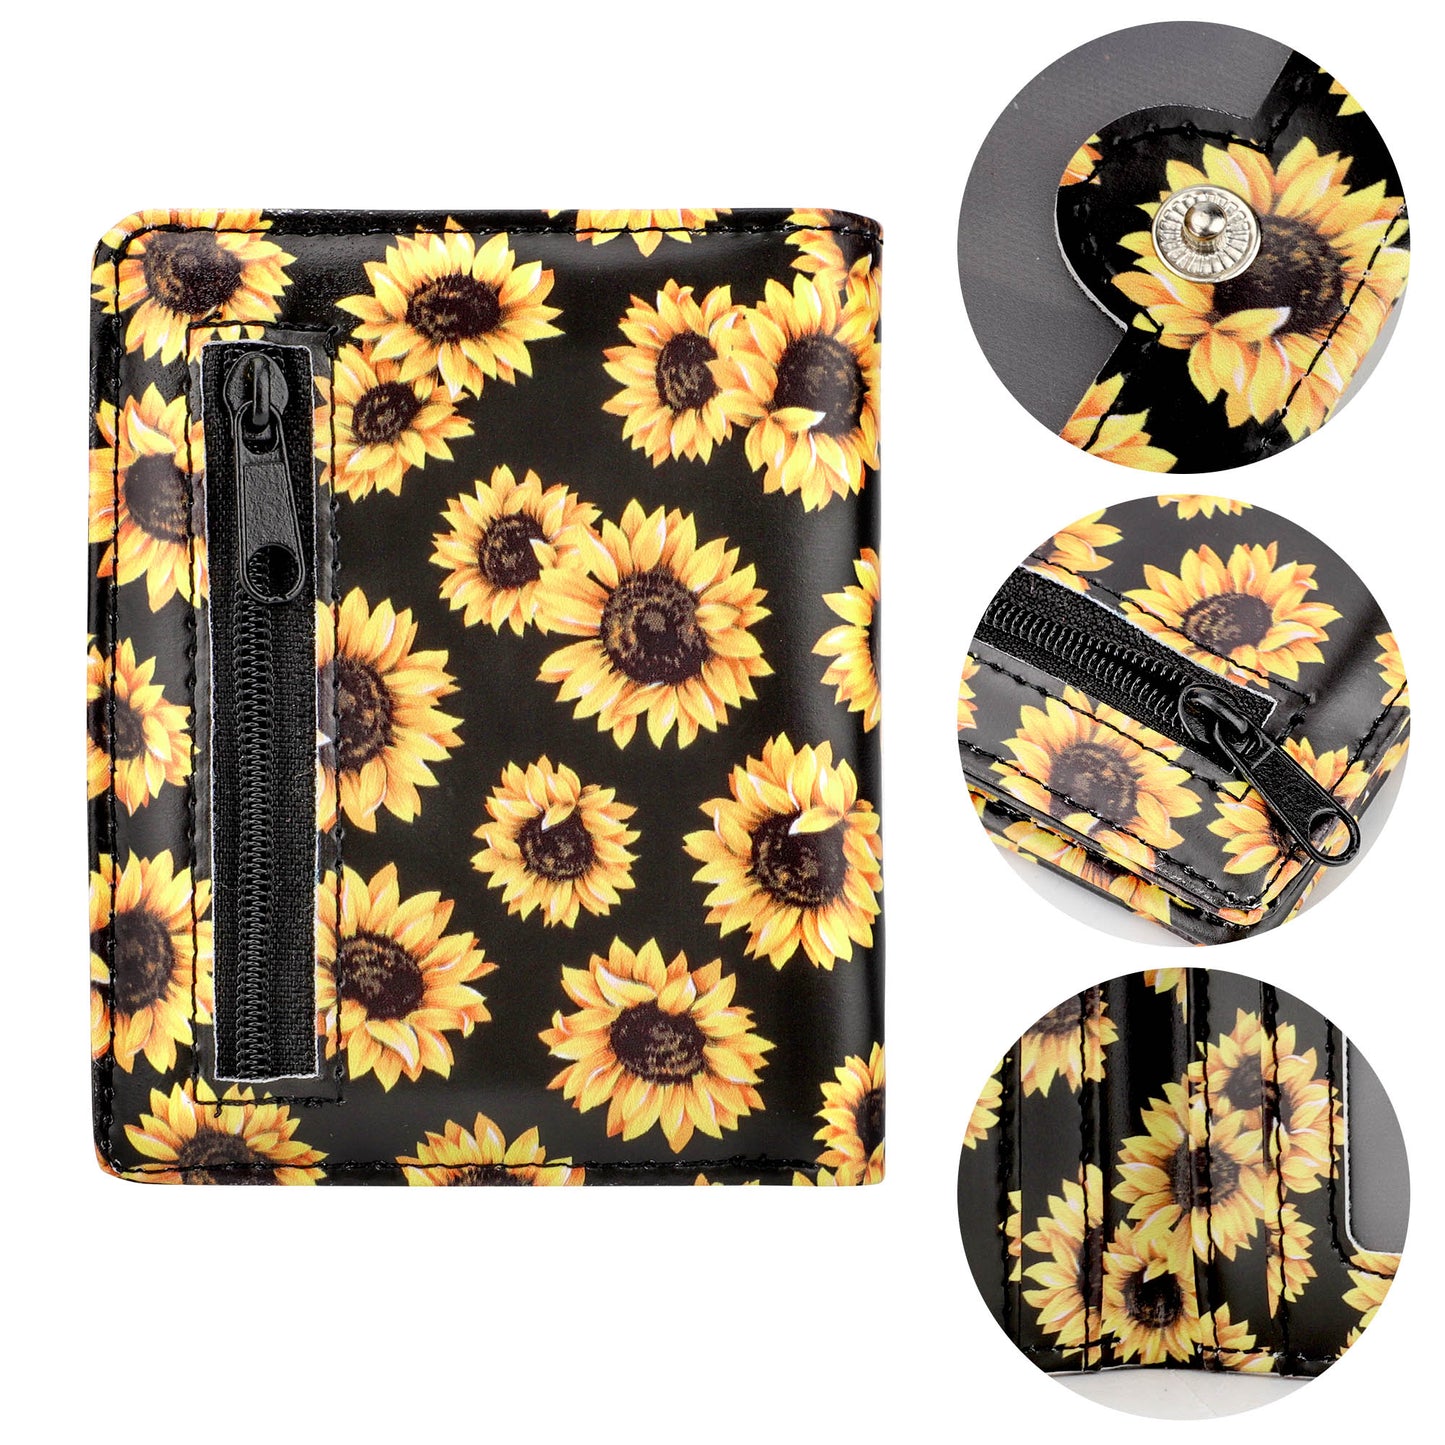 Small Leather Wallet - Bifold Button Closure, Compact and Stylish, Multiple Pockets for Cards and Currency, Sunflower Design